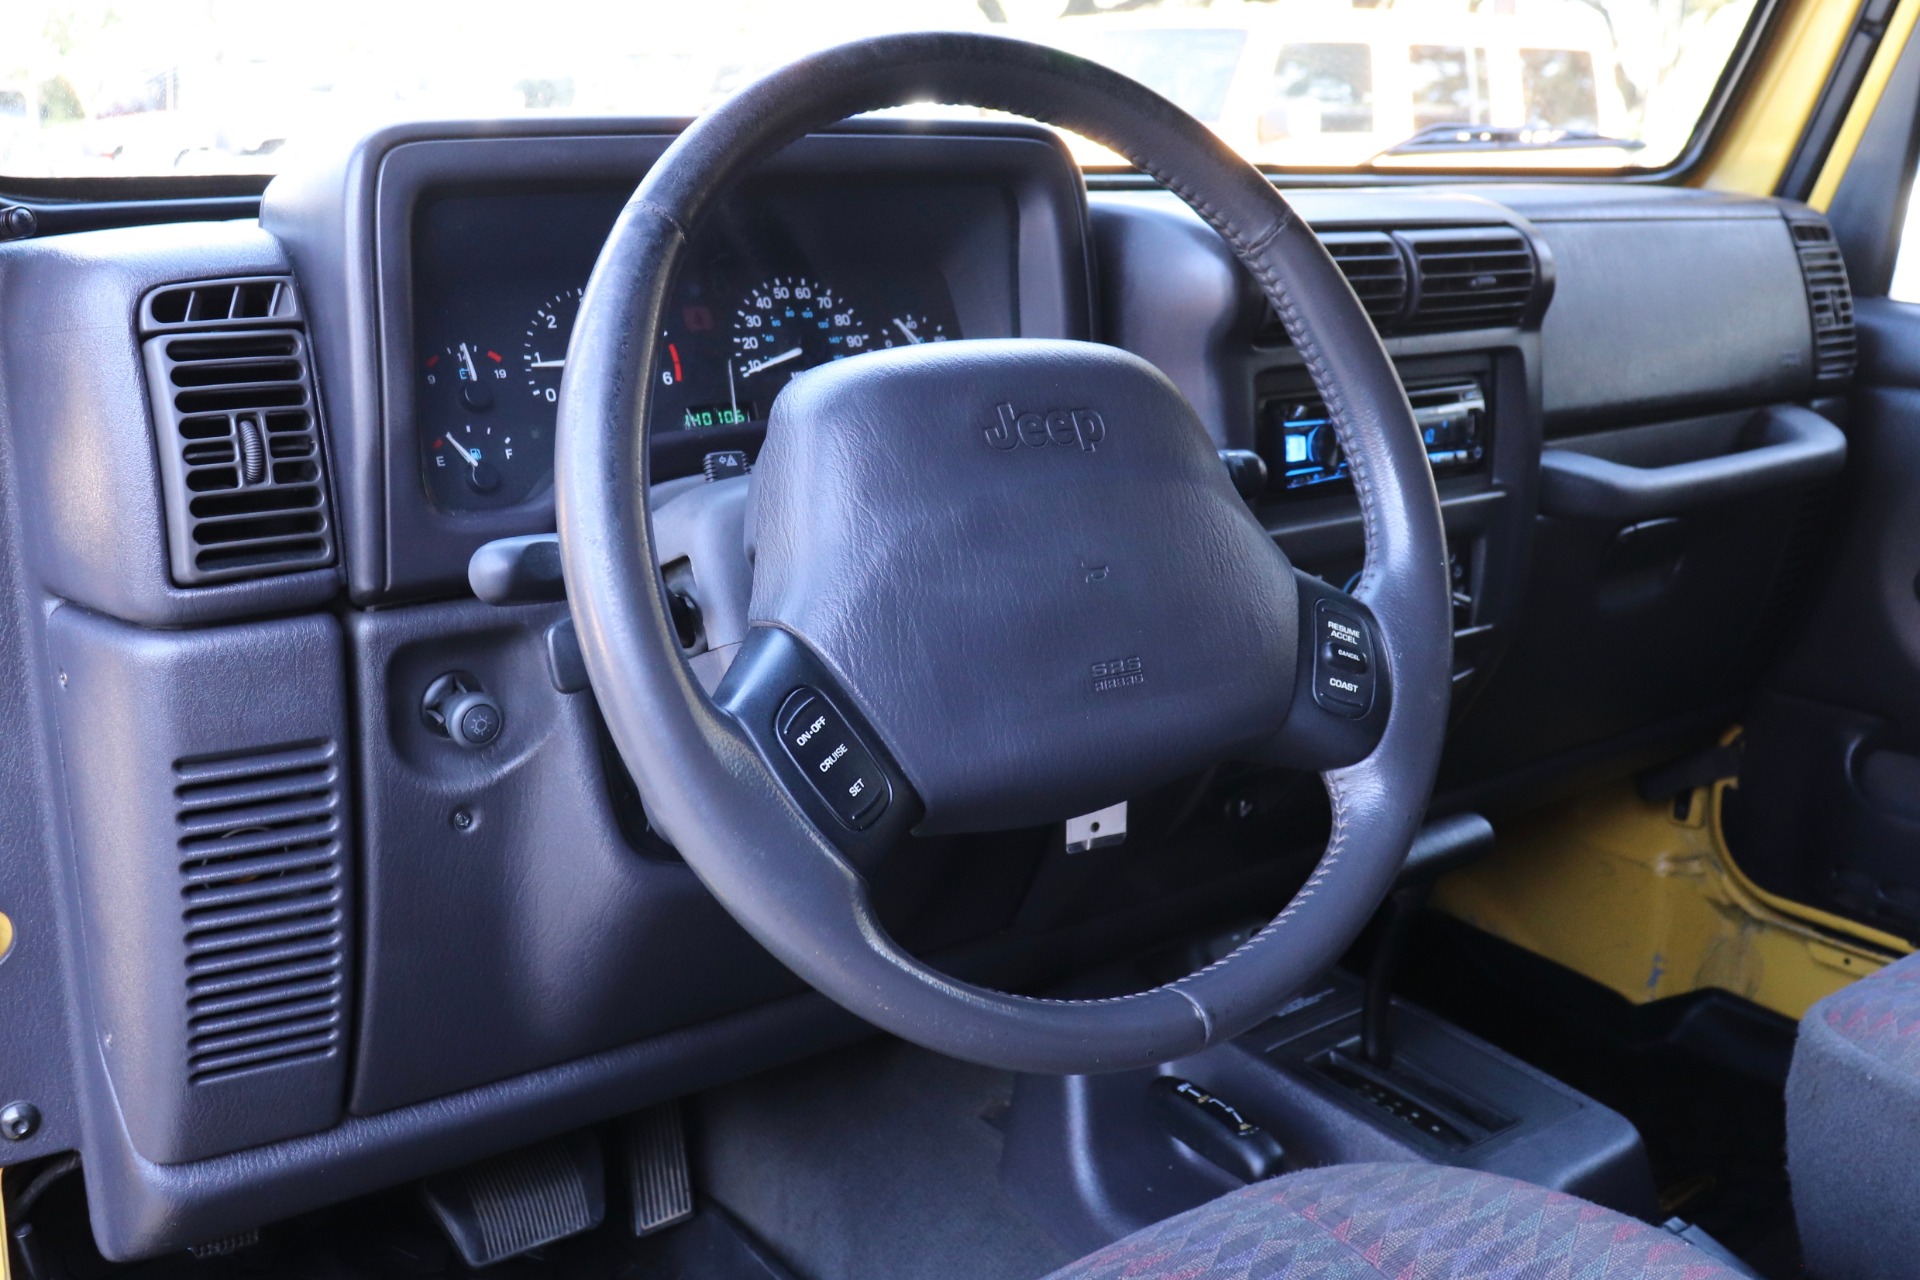 Used 2000 Jeep Wrangler Sport For Sale ($14,995) | Select Jeeps Inc. Stock  #793354